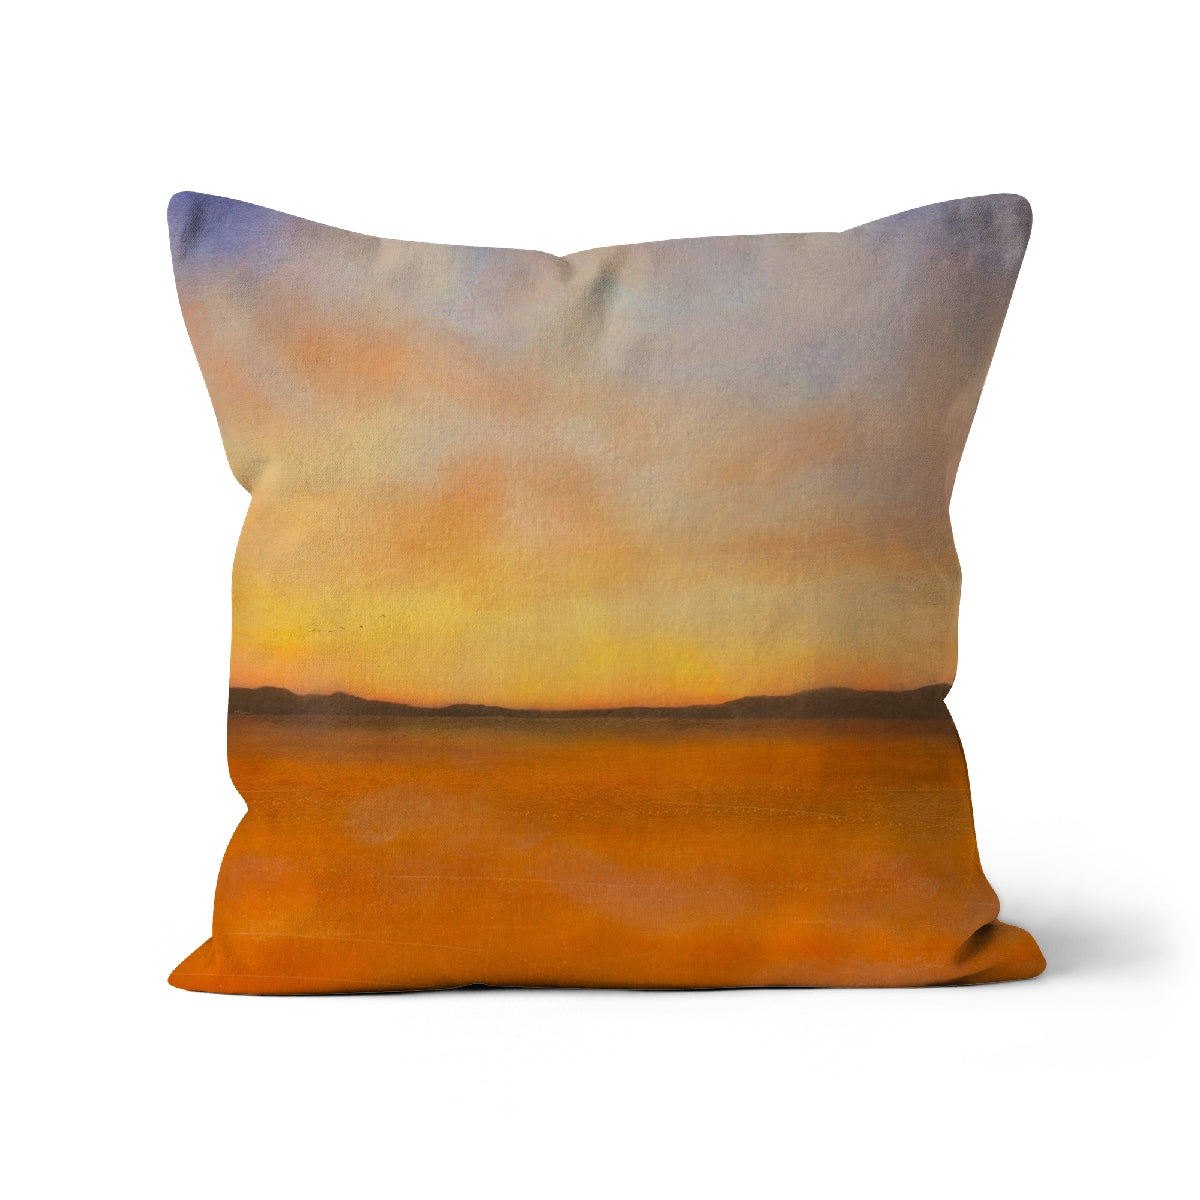 Islay Dawn Art Gifts Cushion-Cushions-Hebridean Islands Art Gallery-Linen-22"x22"-Paintings, Prints, Homeware, Art Gifts From Scotland By Scottish Artist Kevin Hunter